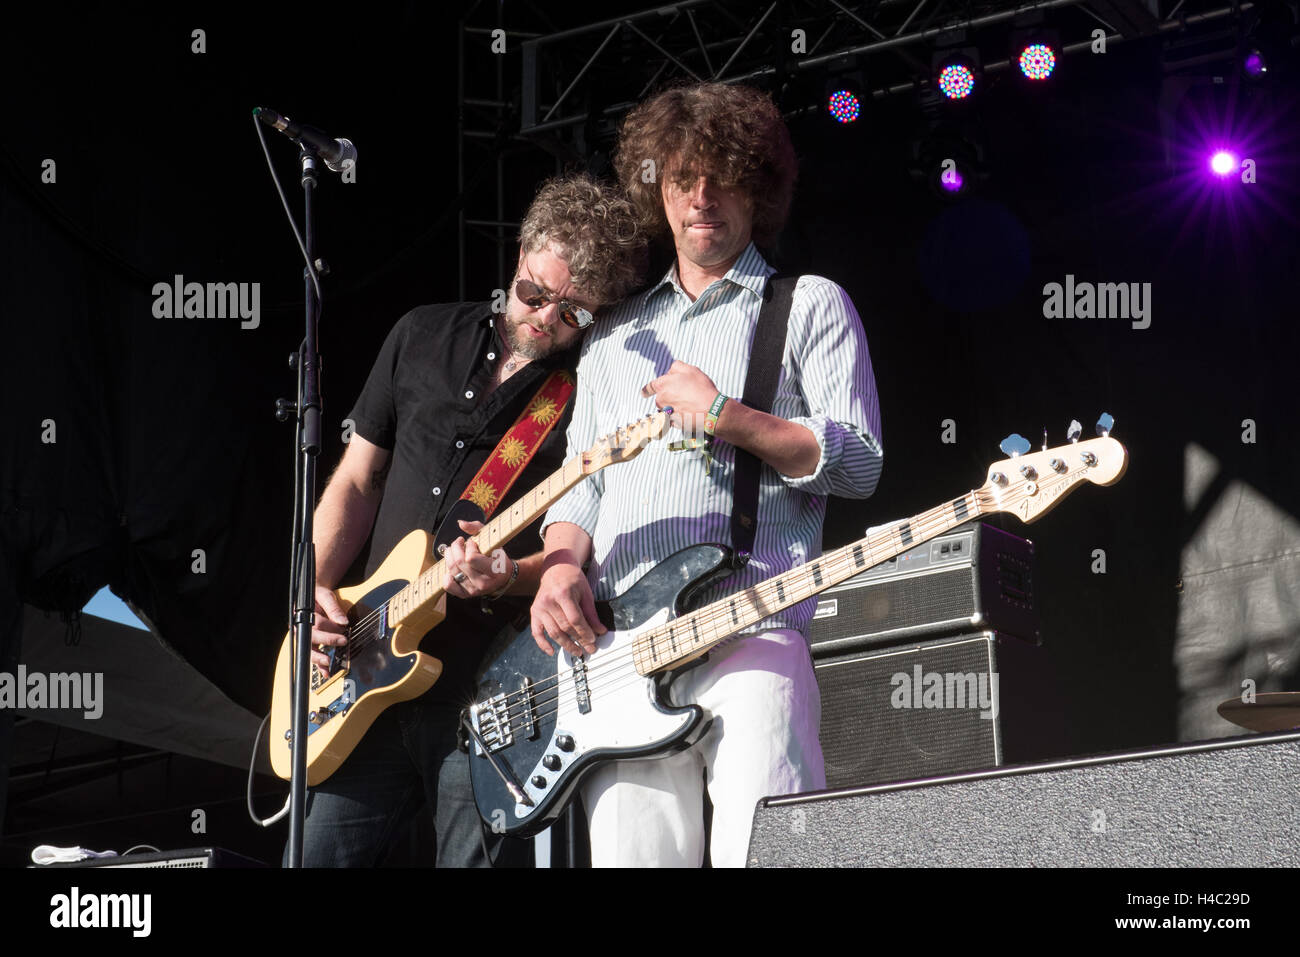 Steve Selvidge and Galen Polivka of The Hold Steady performs at Riot Fest at the National Complex September 2, 2016 in Denver, Colorado Stock Photo